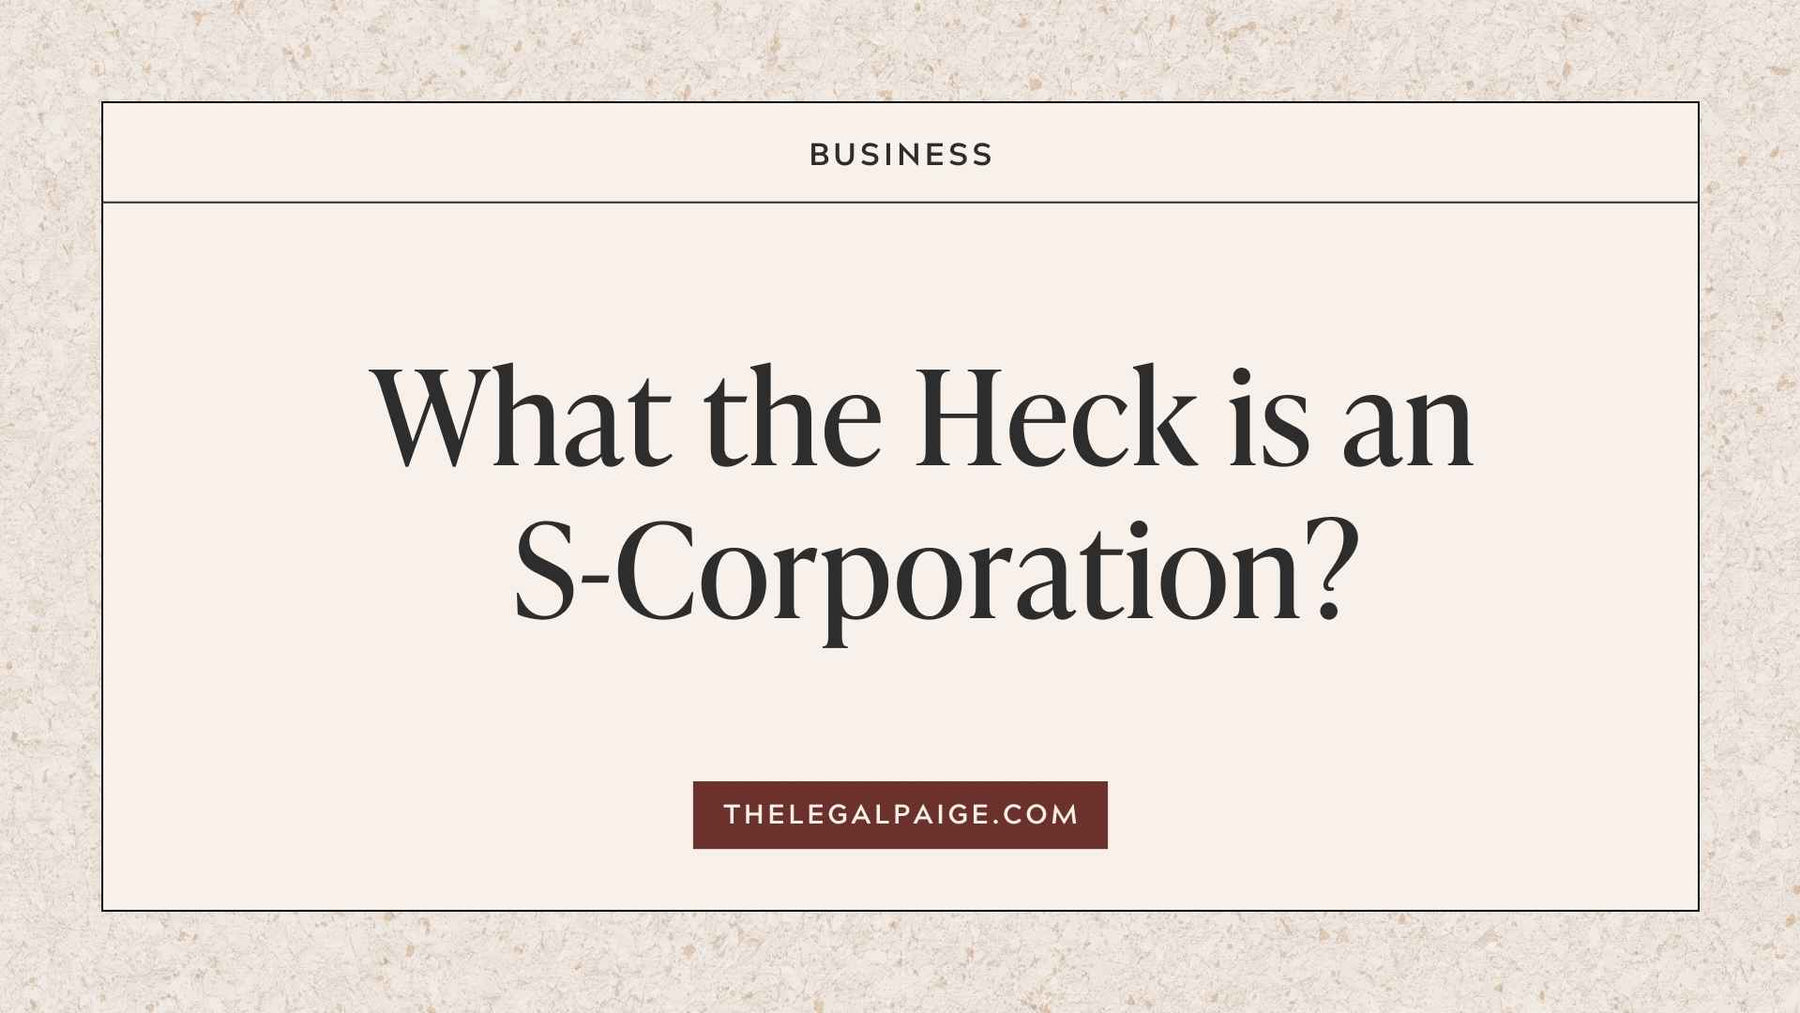 What the Heck is an S-Corporation?